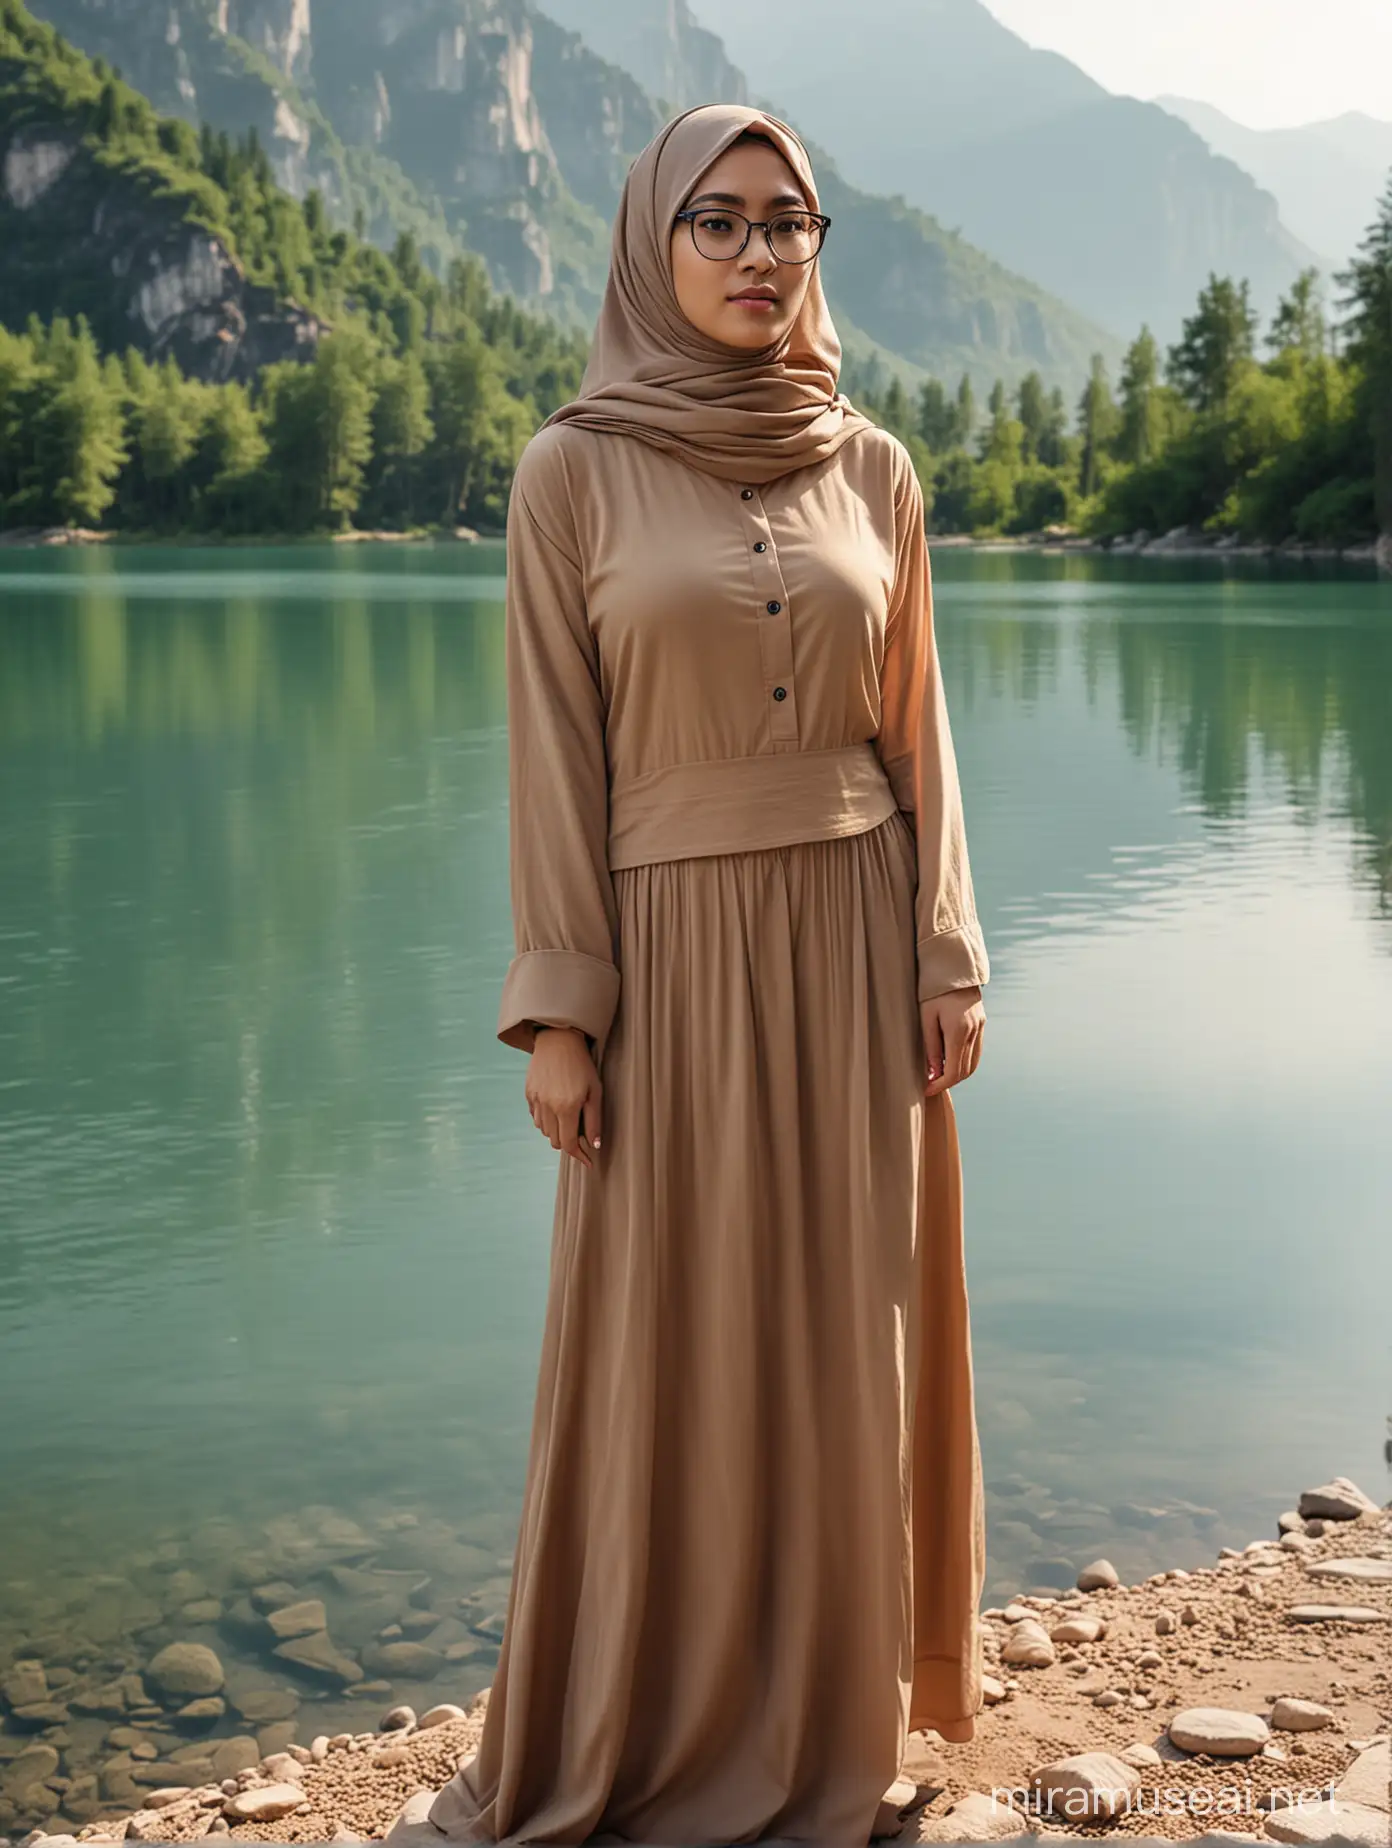 An asian woman wearing hijab, wearing glasses with black frames, wearing large light brown shirt, and long light brown skirt, standing beside beautiful lake, surrounds woods and mountain, ultra hd photograph